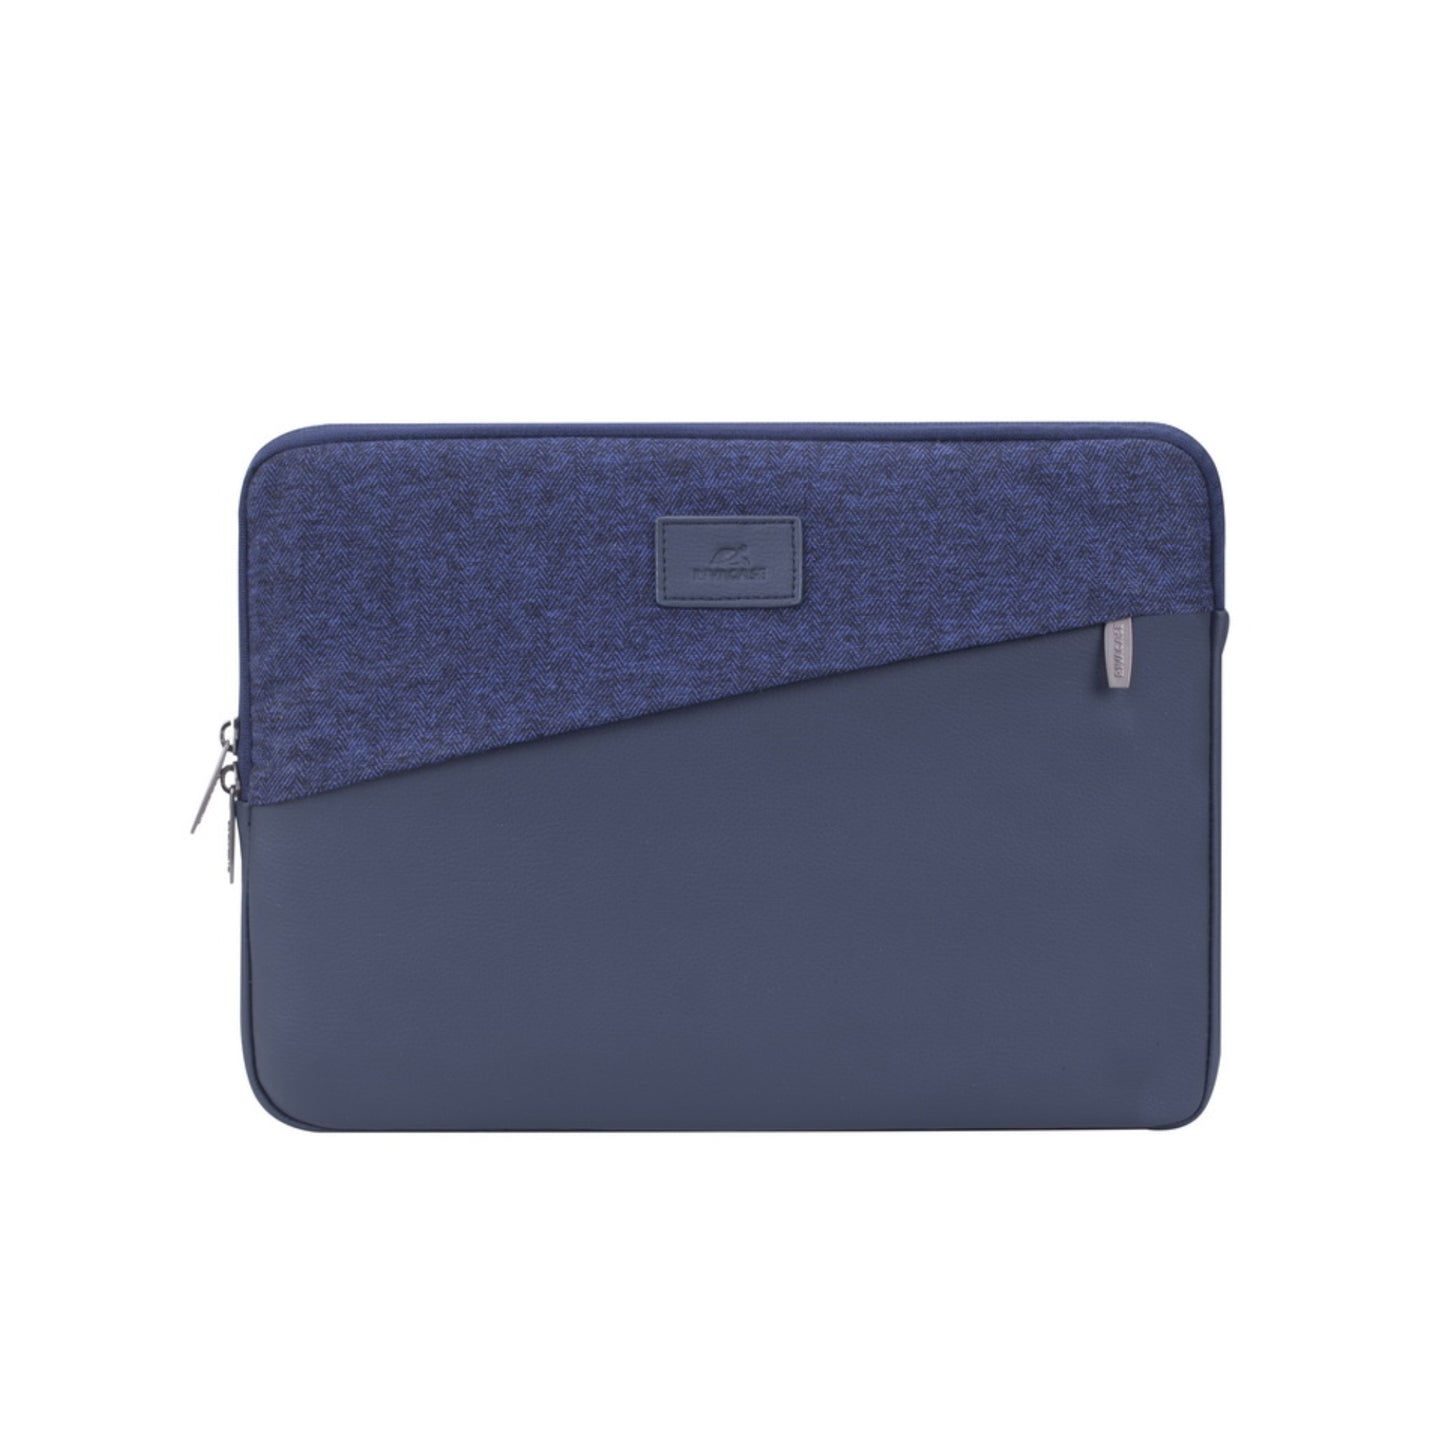 RIVACASE 7903 Laptop Sleeves 14/13 - Blue